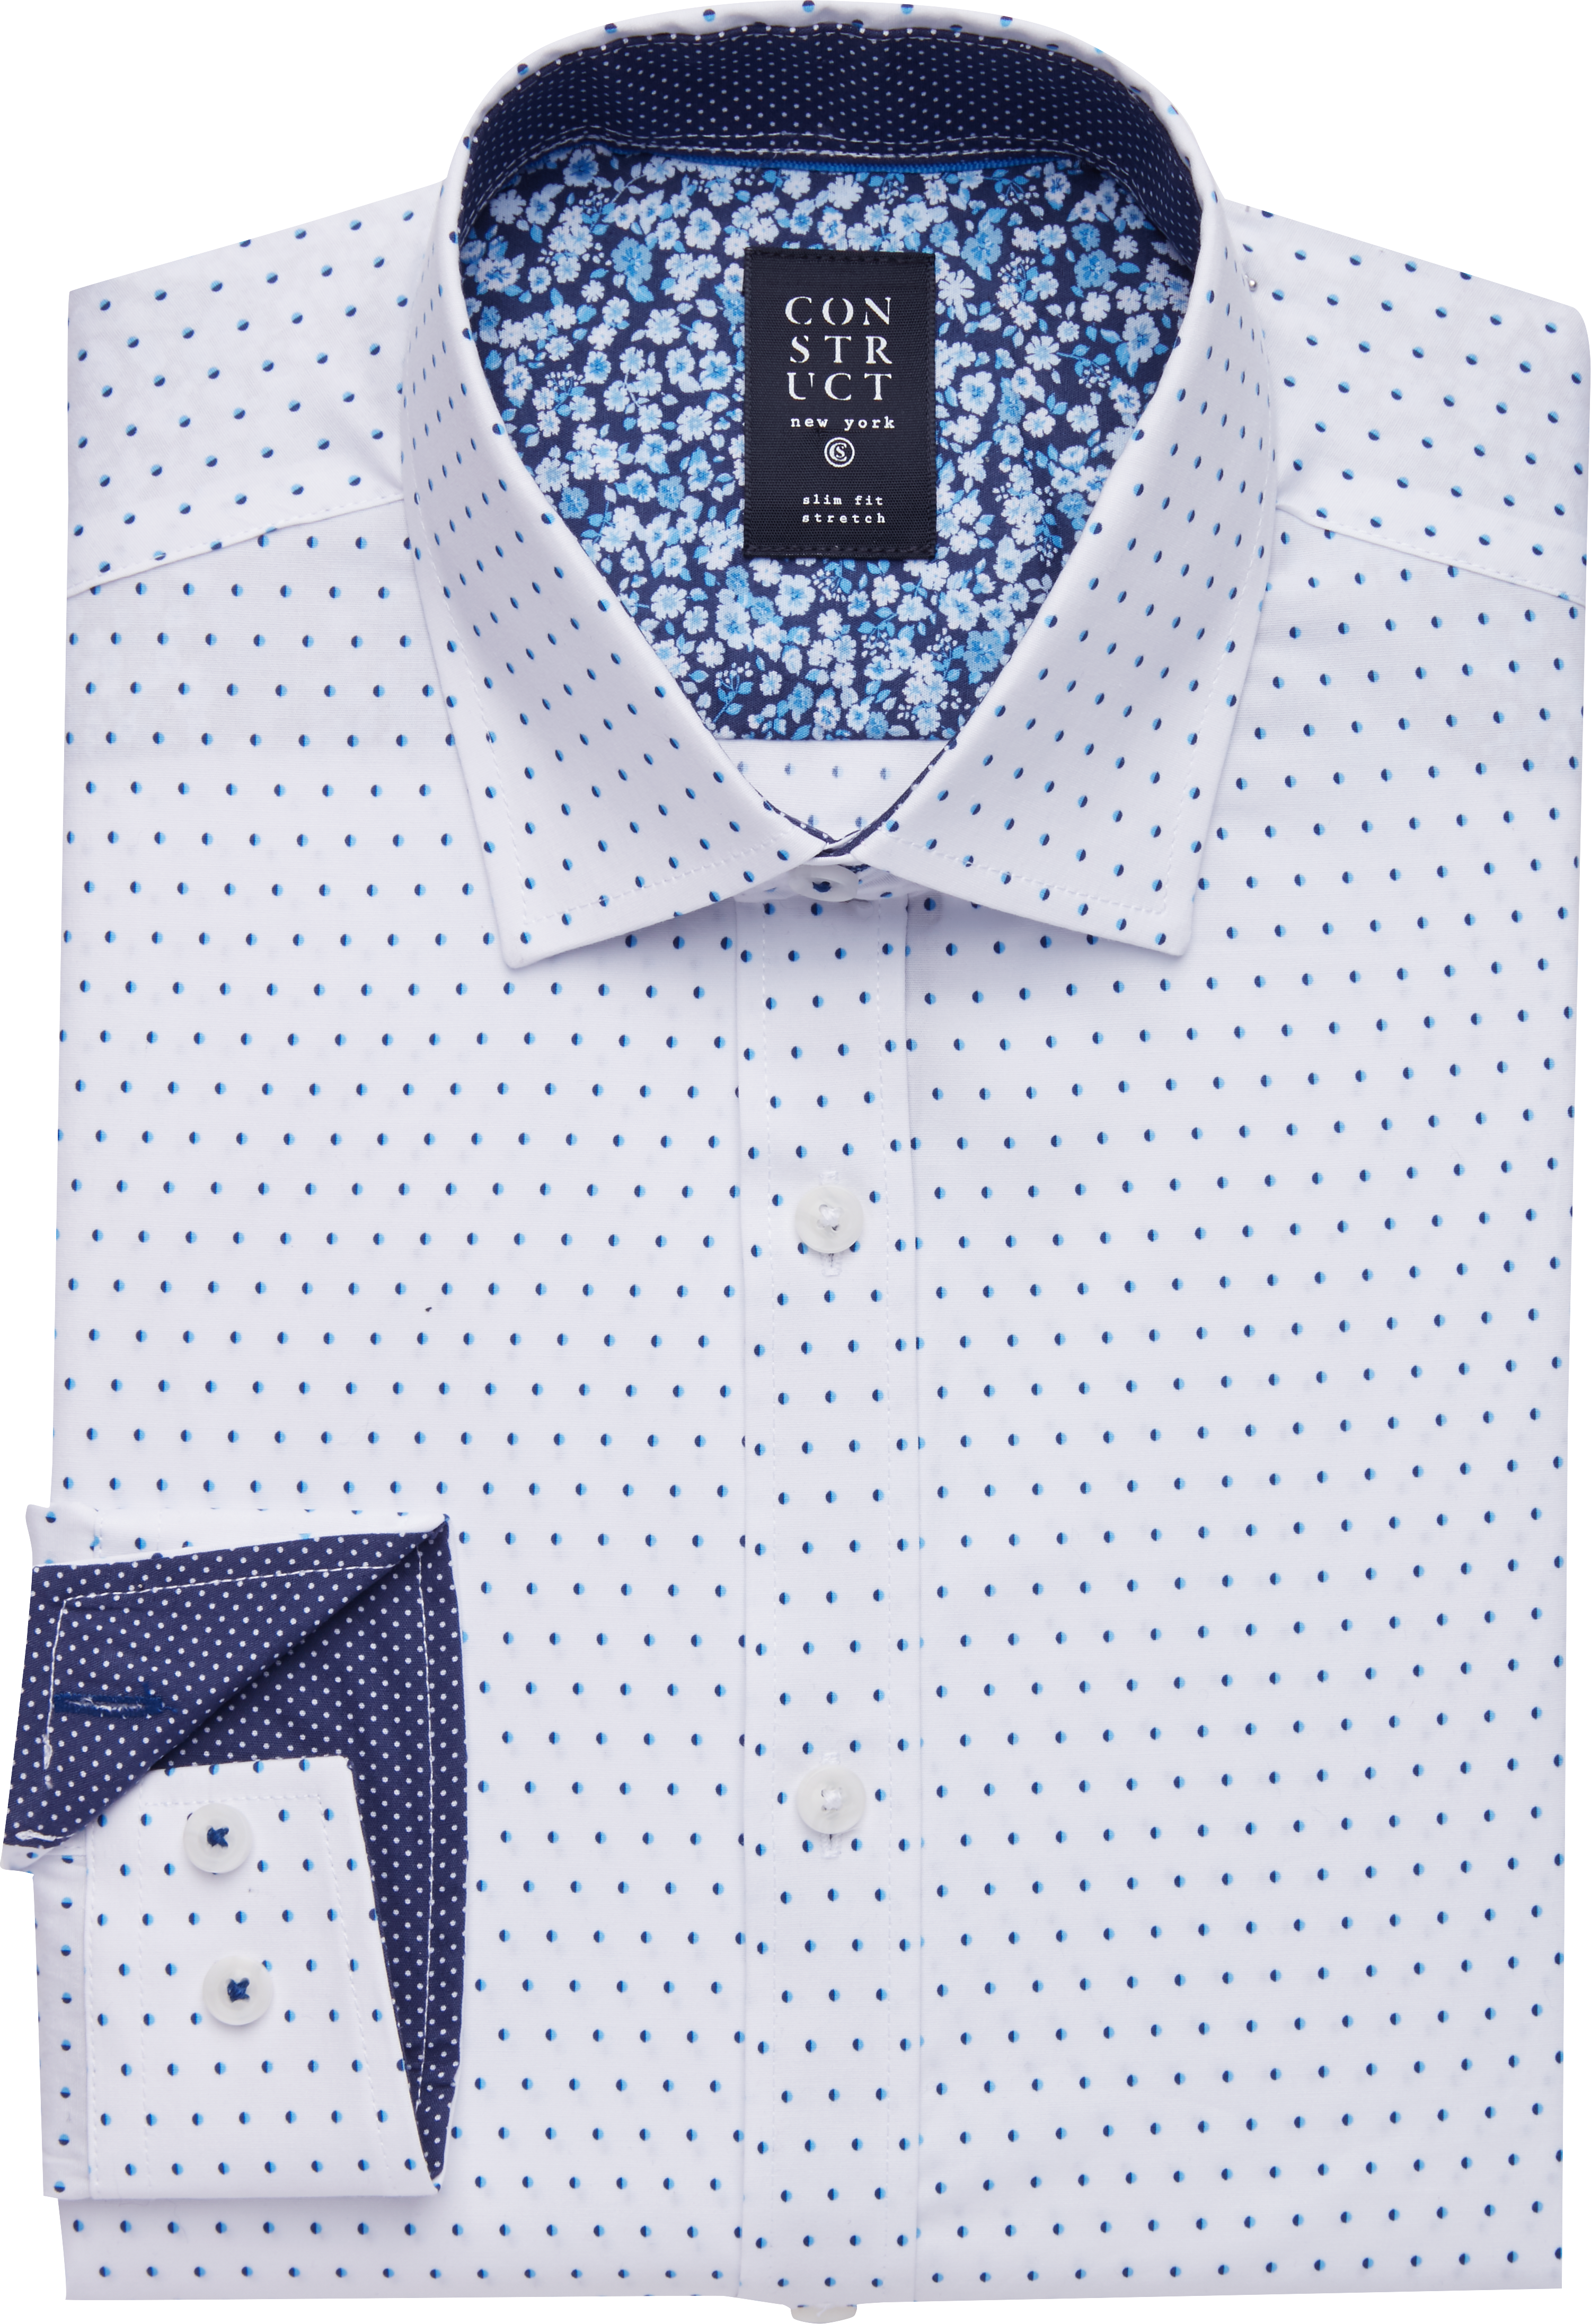 white dress shirt with blue dots